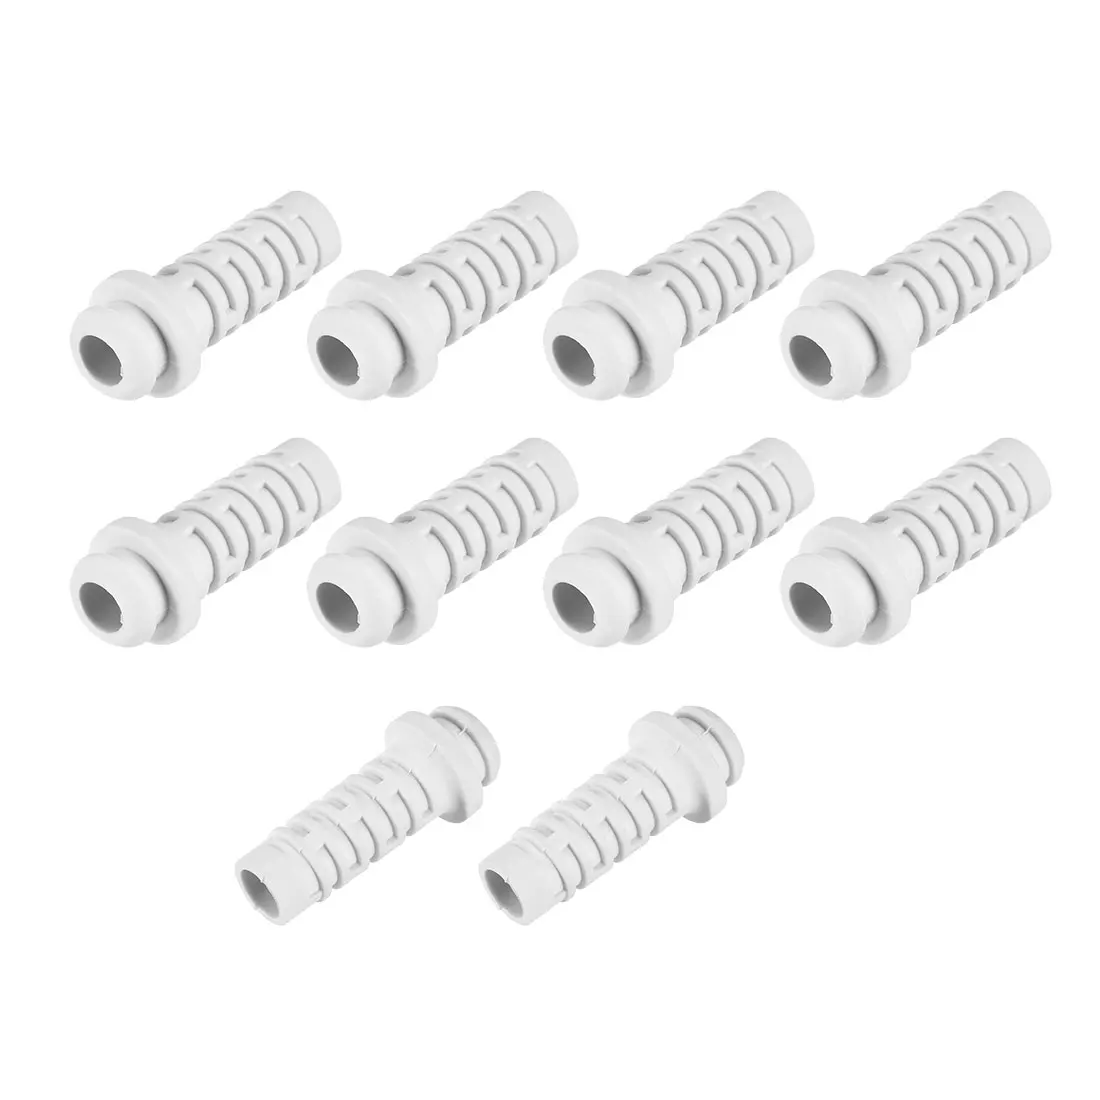 

uxcell 10Pcs Strain Relief Boots 34mm PVC Cable Protector Sleeve Cover for 2AWG Electrical Cables White Protect Power Cords